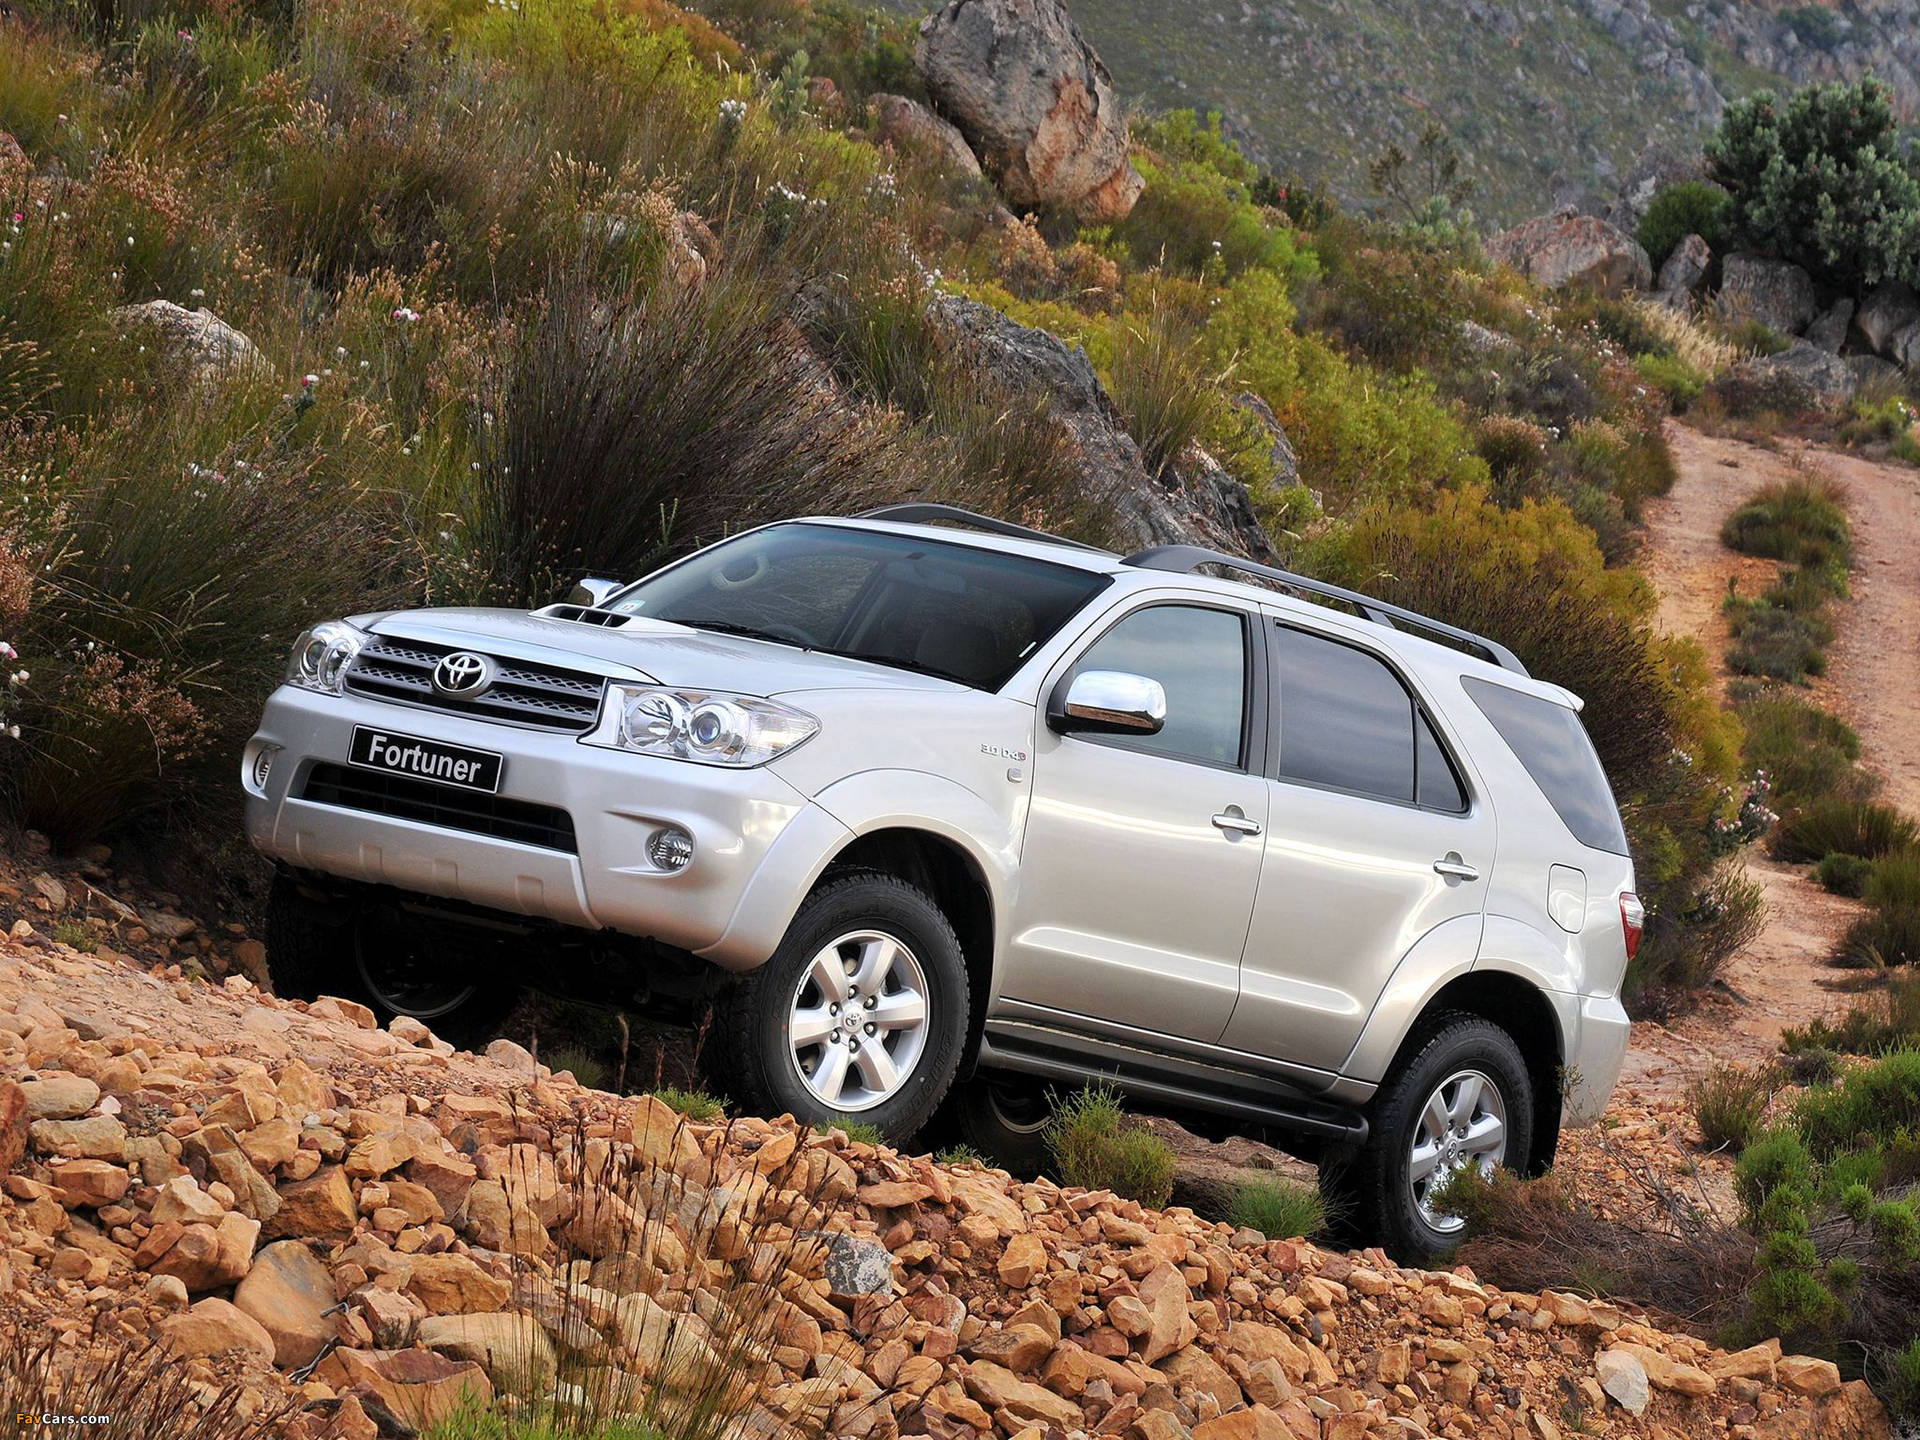 Toyota Fortuner 4x4 Off-road Suv Wallpaper